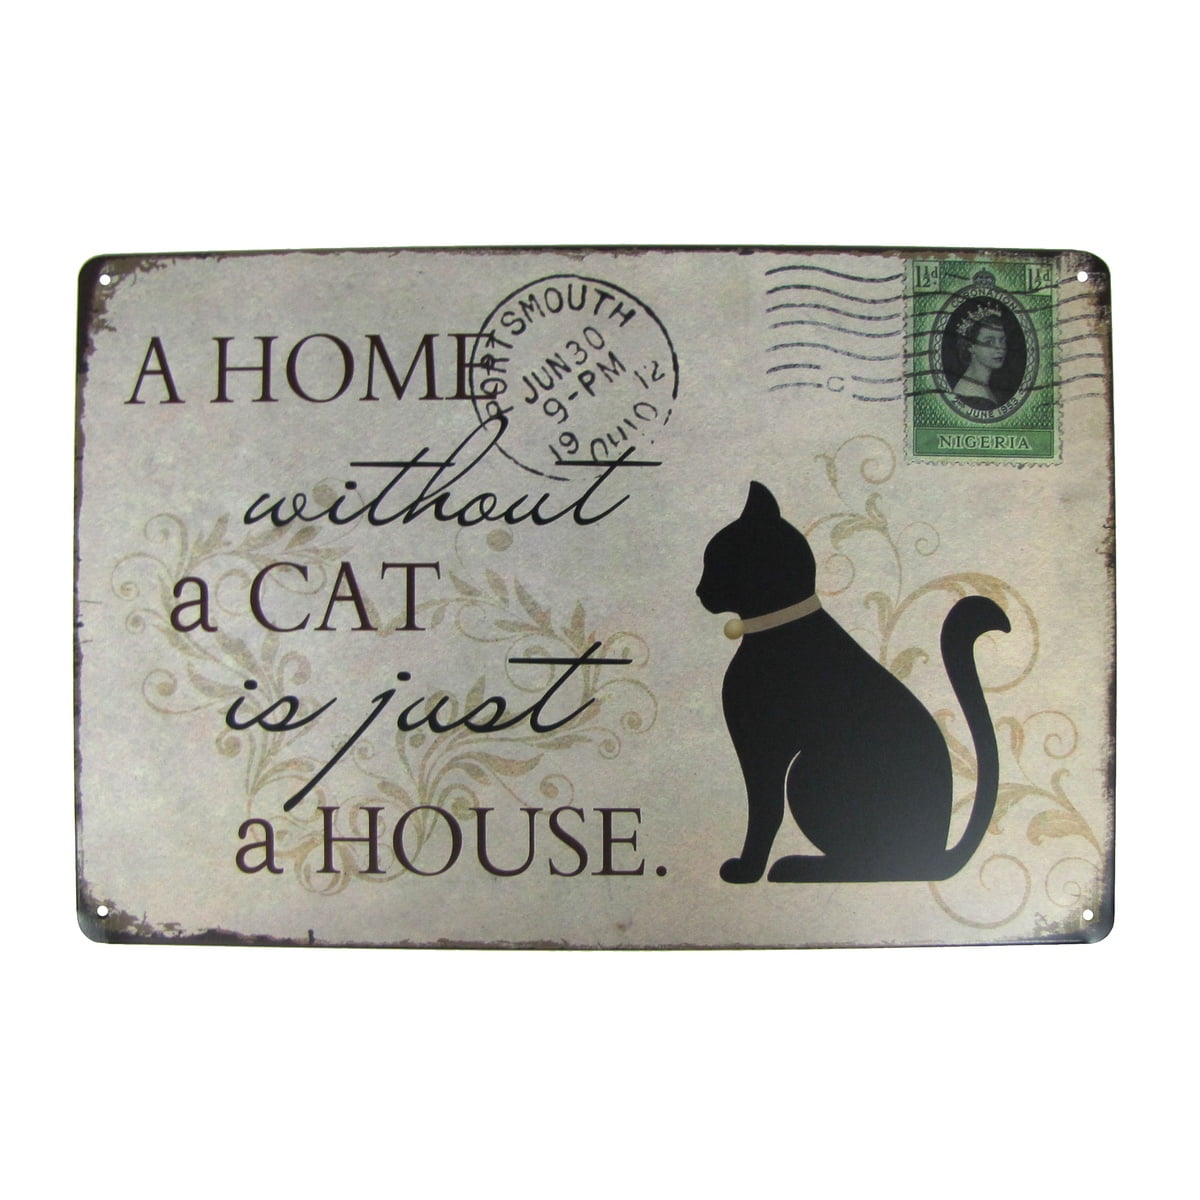 Living Room 10x5 Inches Wall Hanging Plaque Gift for Cat Lovers Putuo Decor Cat Sign Porch Funny Home Decor for Bedroom Live Love Purr